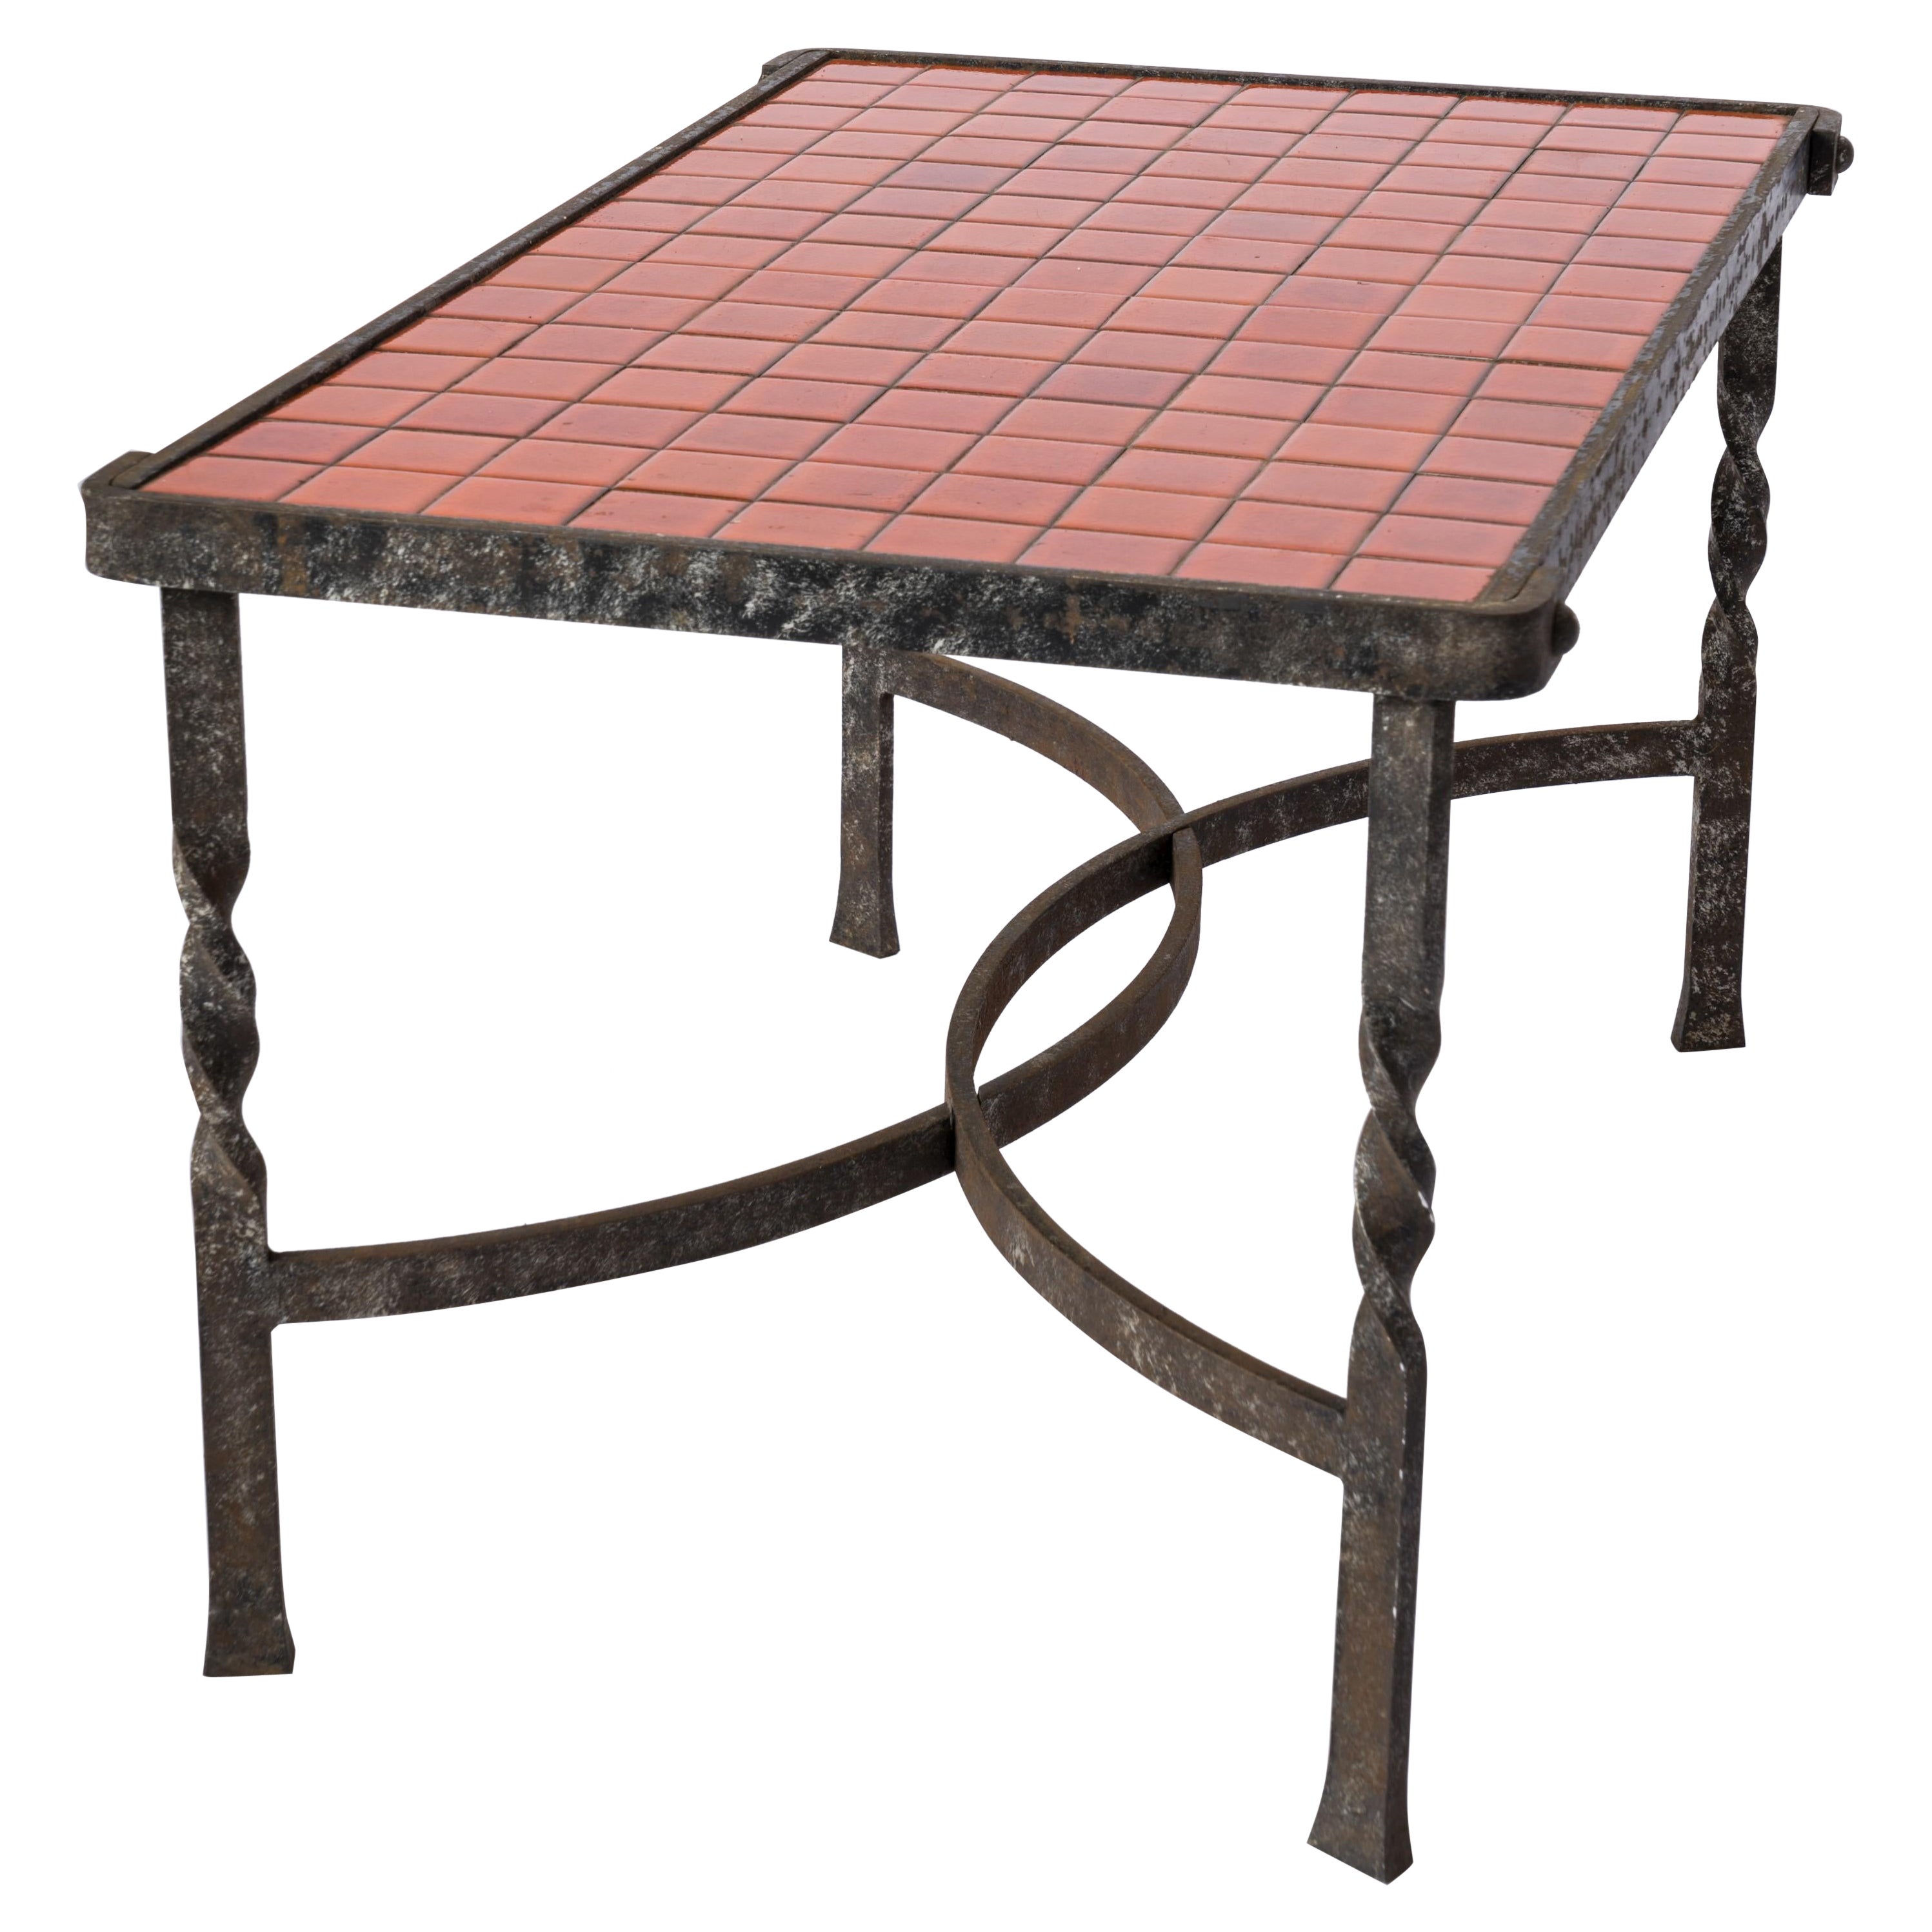 Ceramic tiles coffee table with 